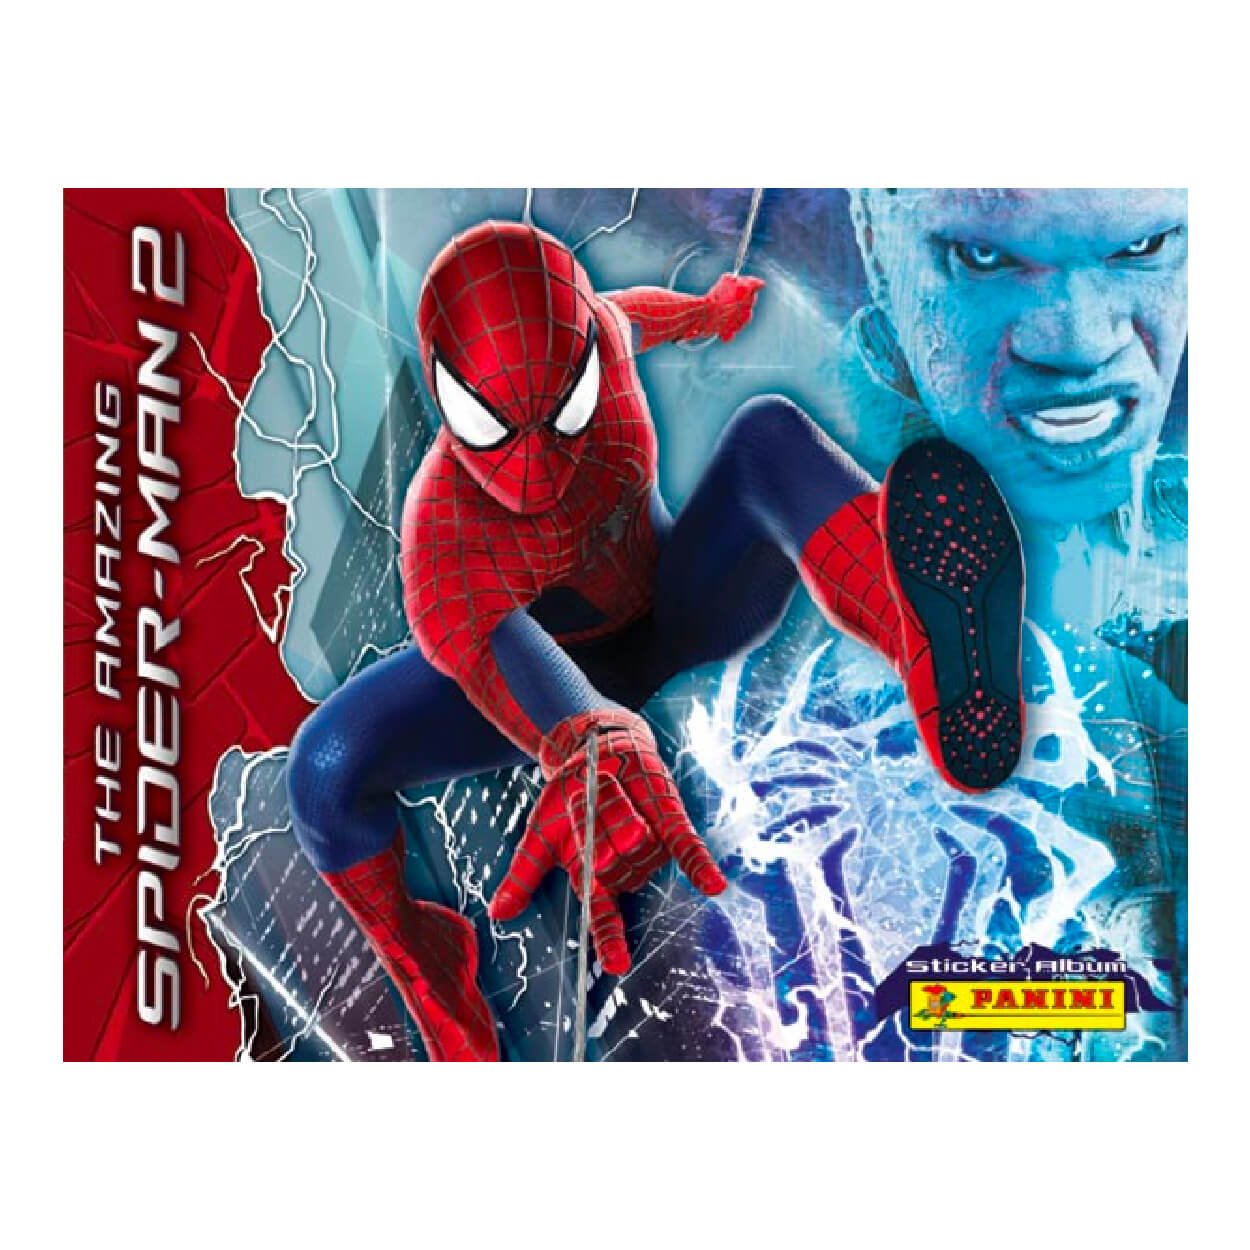 Earthlets| Amazing Spiderman Sticker Collection | Earthlets.com |  | Sticker Collection